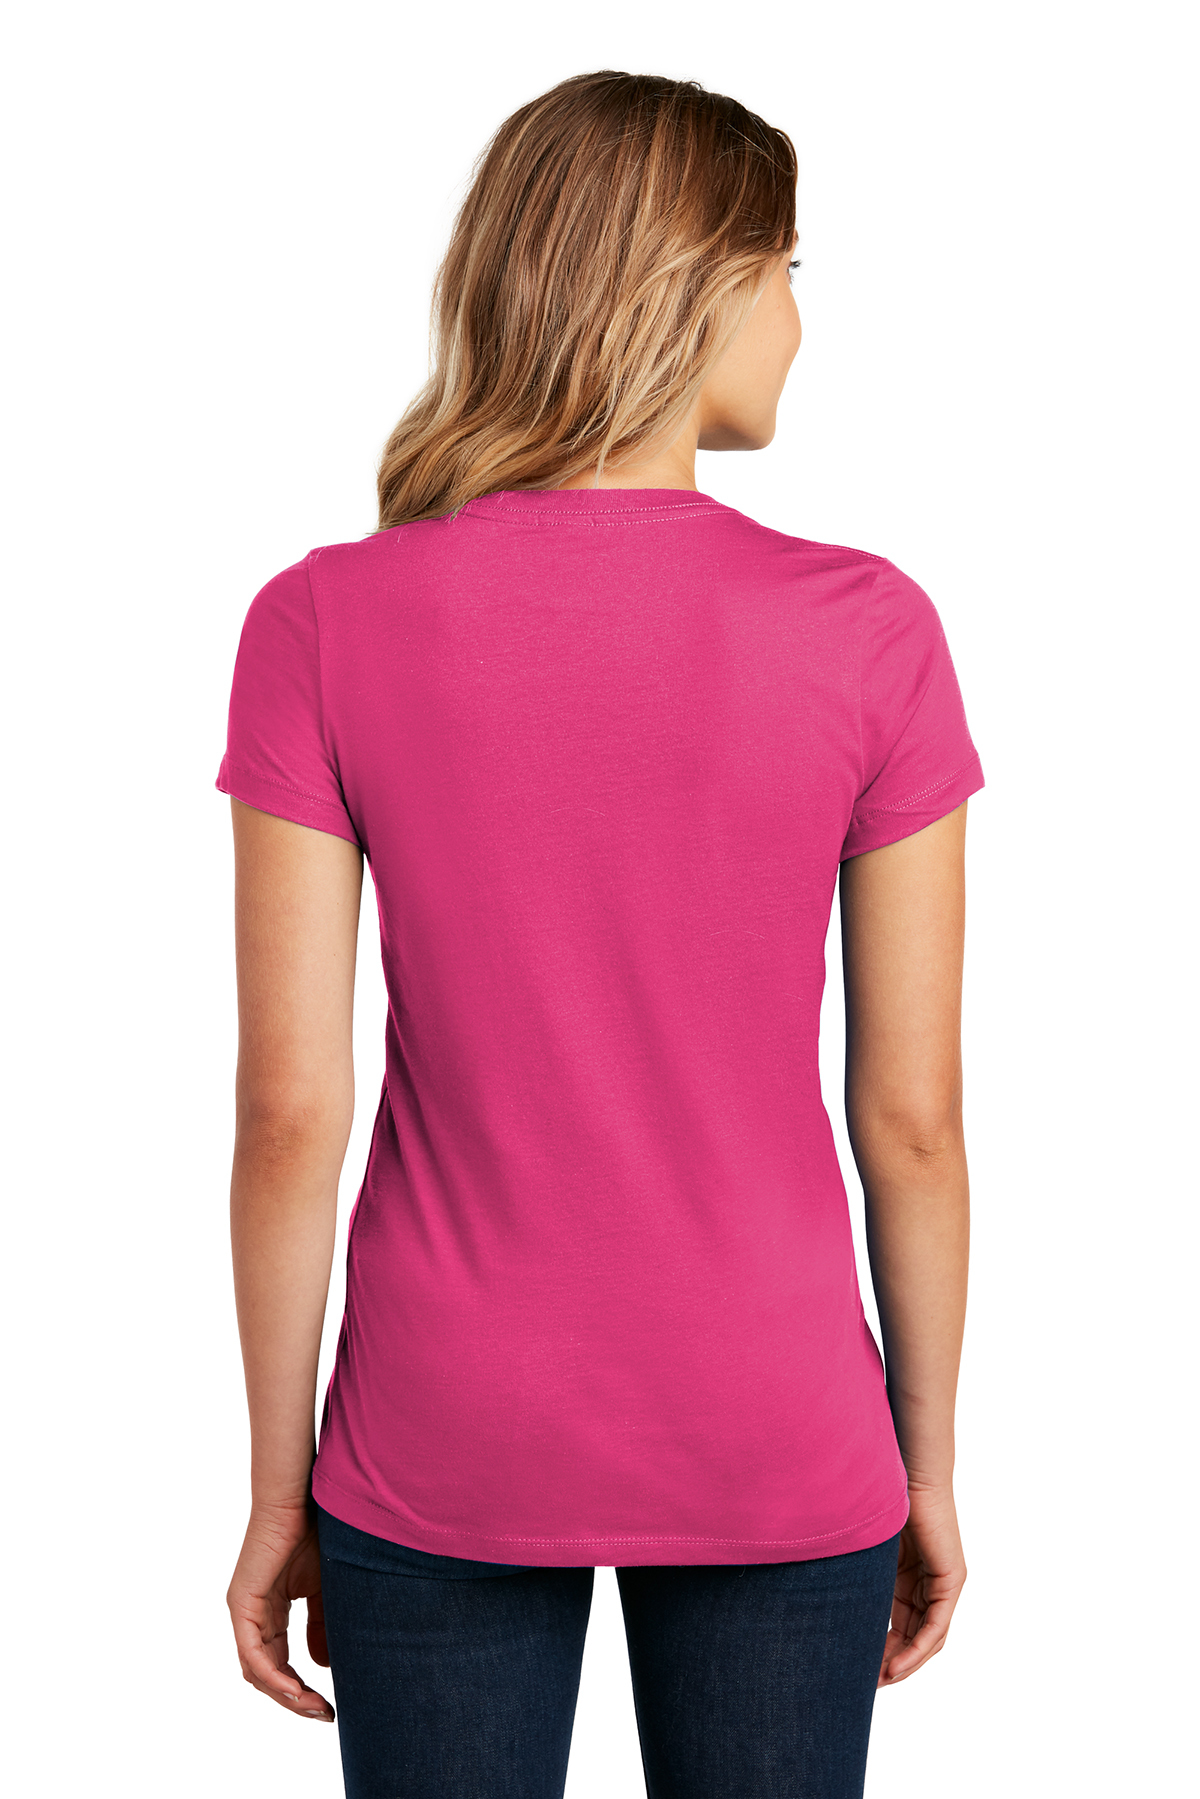 District Women's Perfect Weight Tee | Product | District